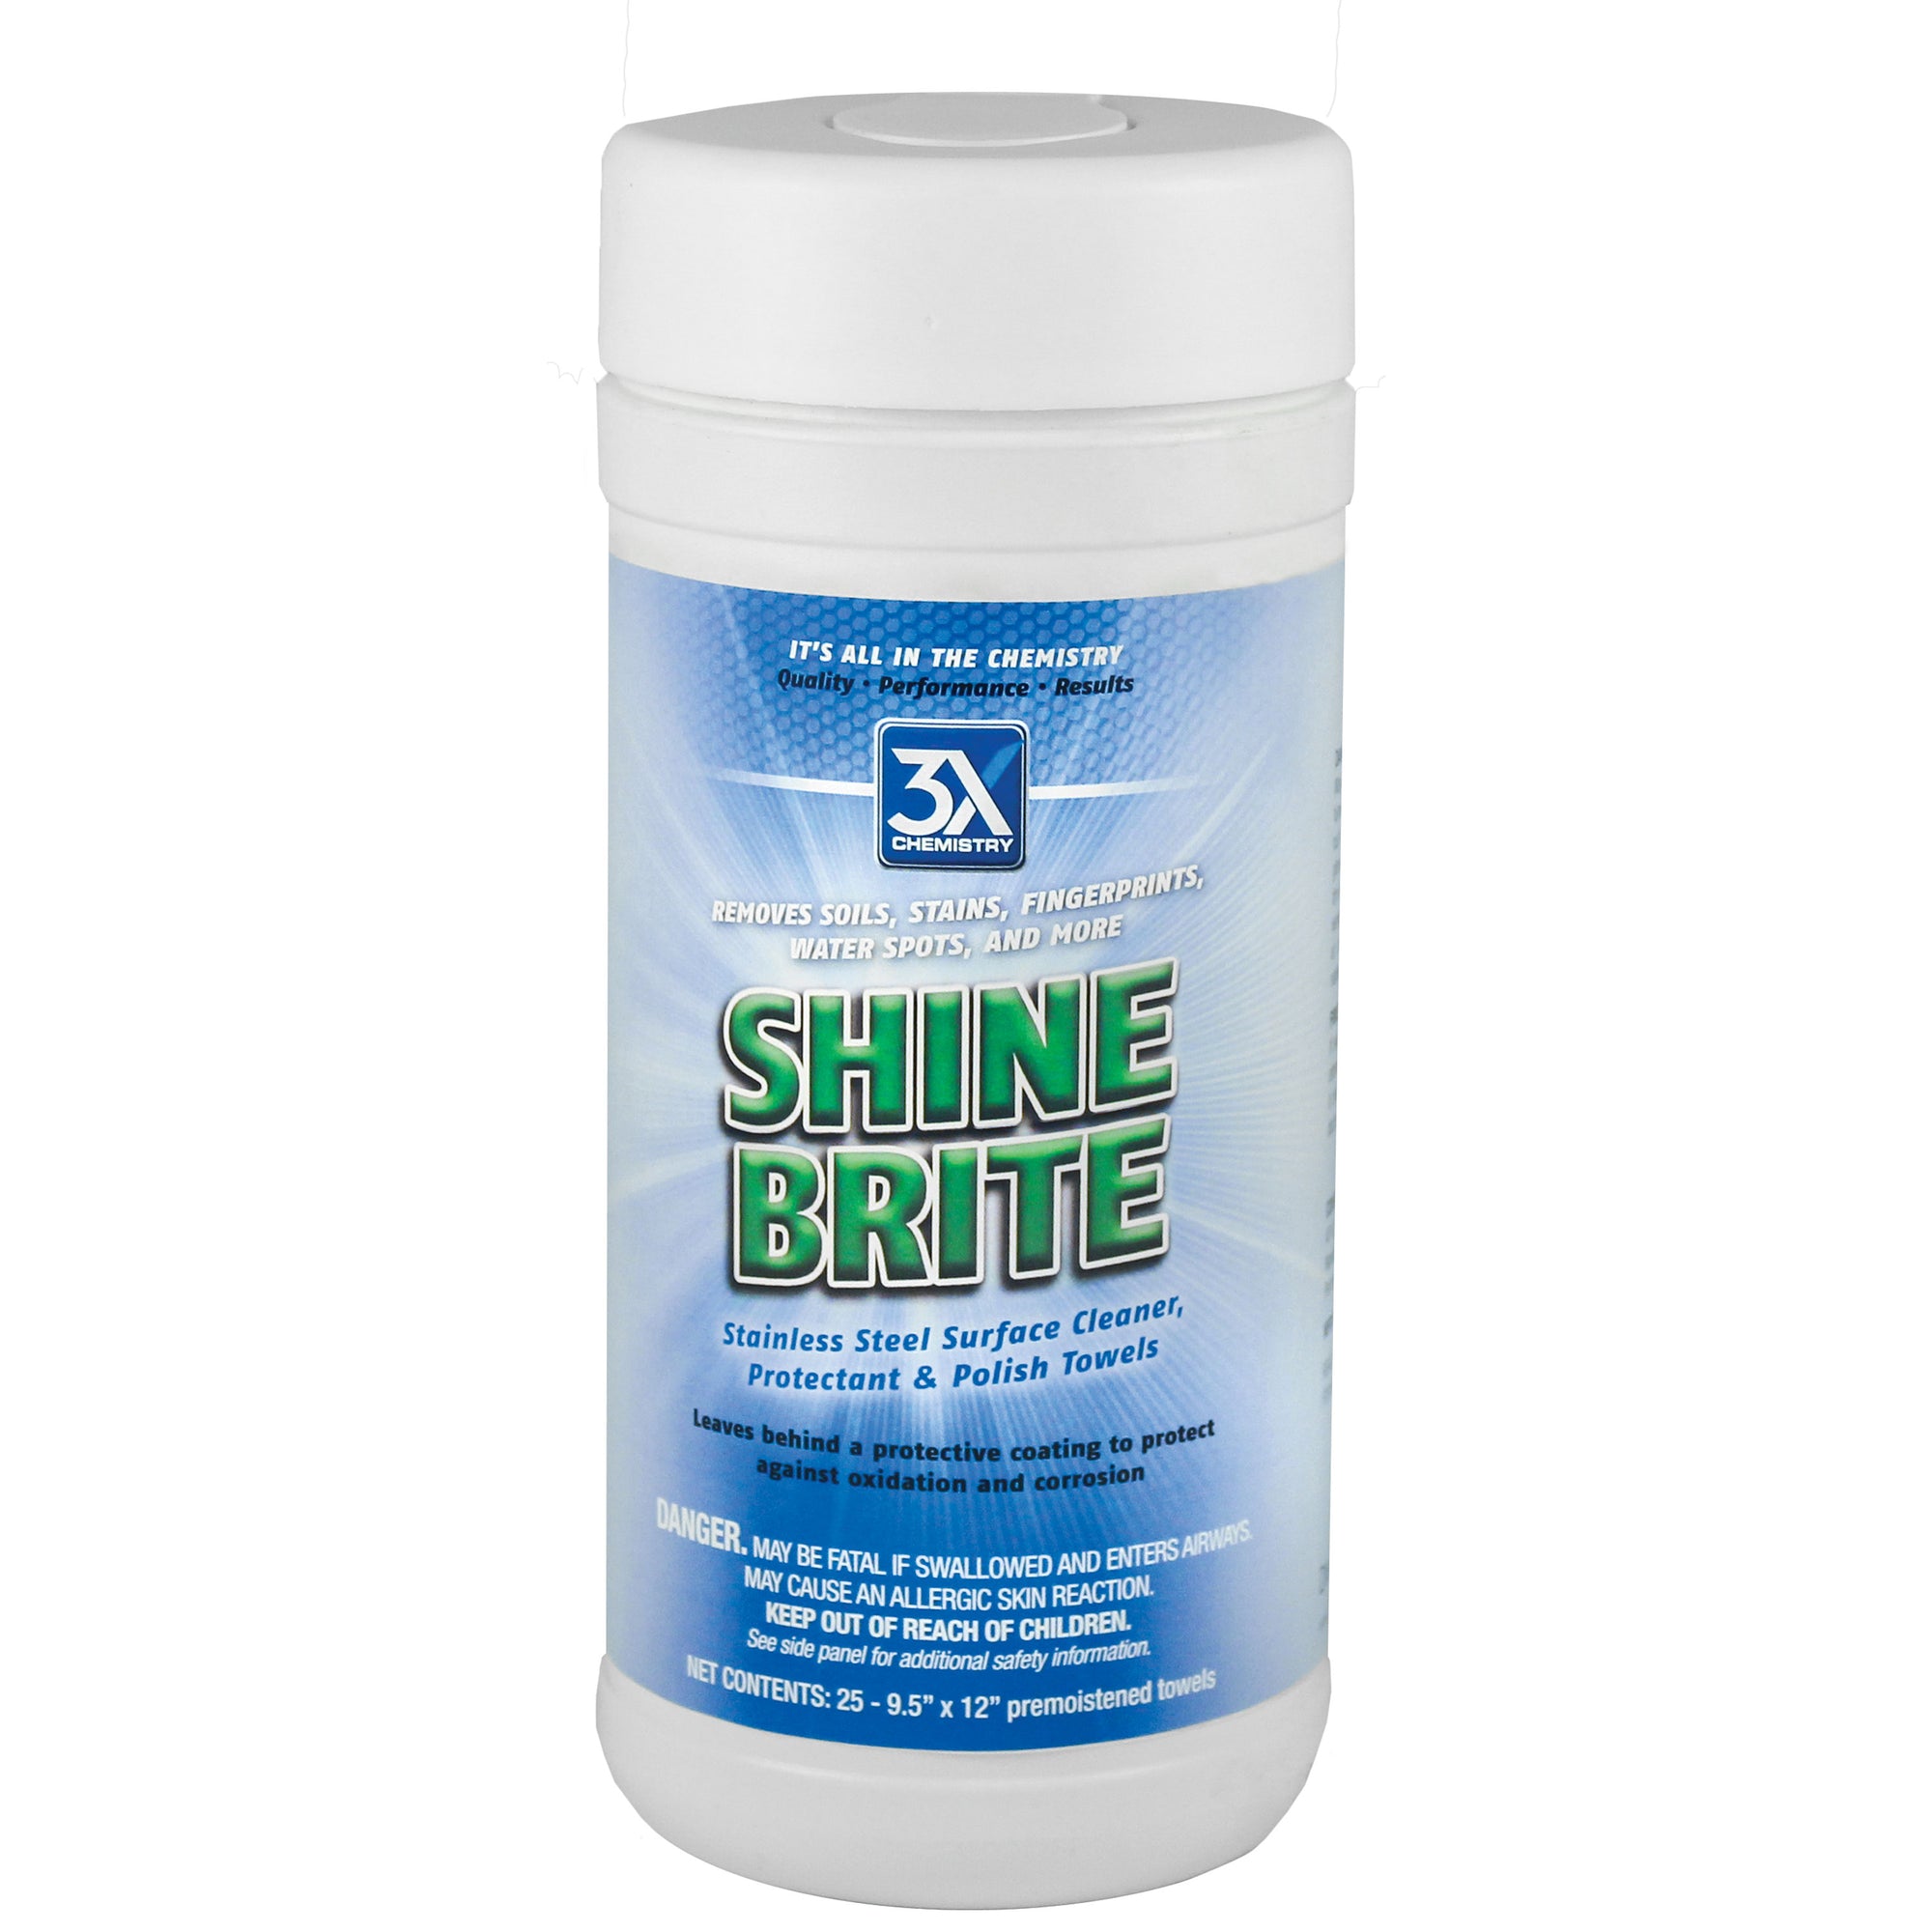 AP Products 159 Shine Brite Stainless Steel Surface Cleaner, Protectant, and Polish Towels